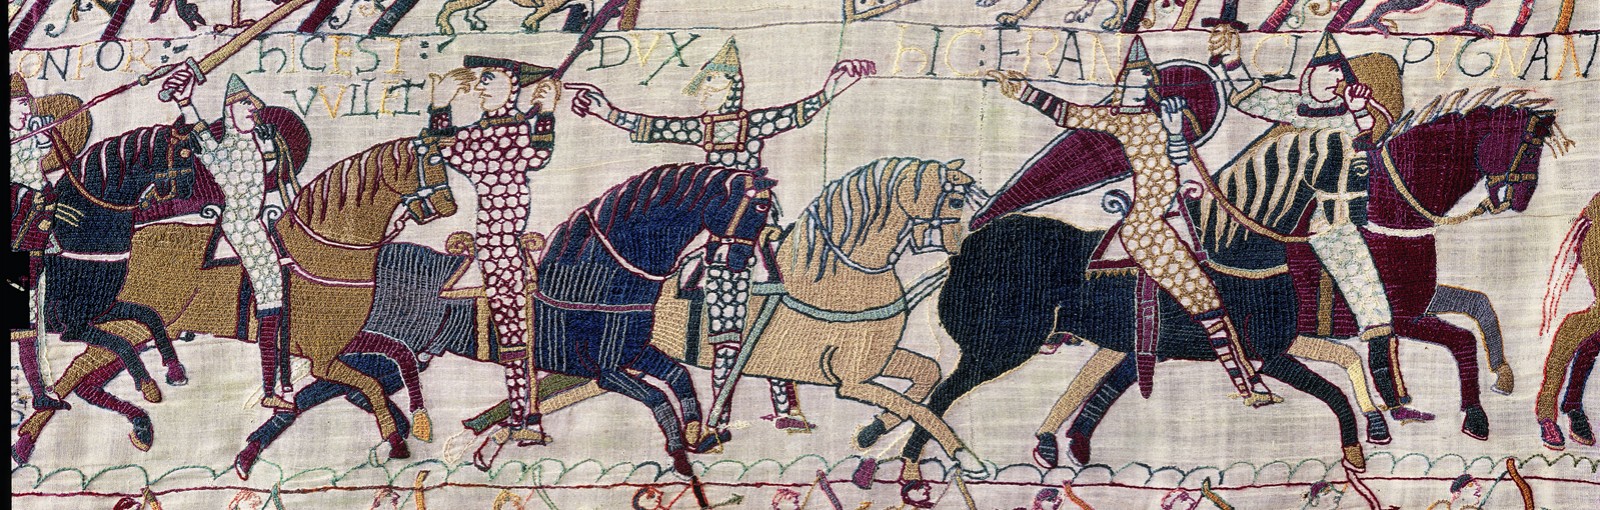 Bayeux tapestry - scene 55 - King William: See, I'm alive!